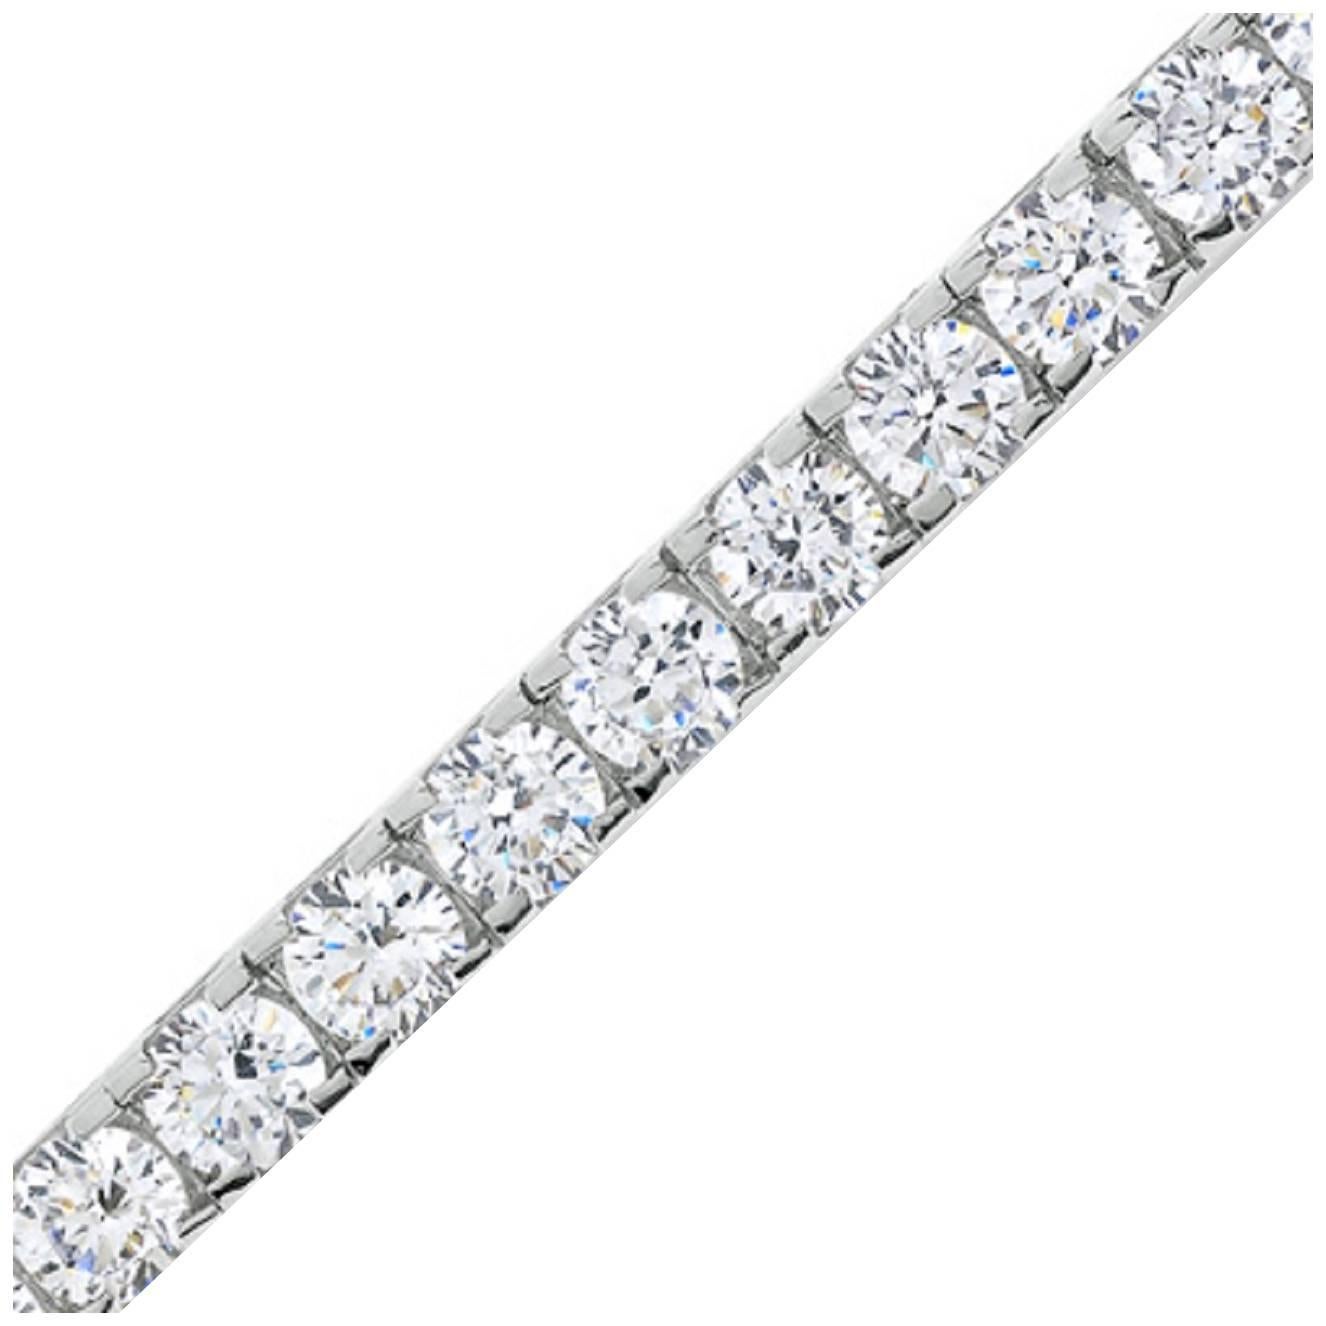 Diamond Tennis Bracelet
Total weight; 6.00 Cts.
Gold: 14K
Diamond Count: 51 
Average weight per Diamond: 0.12
Color : G-H
Clarity: SI
